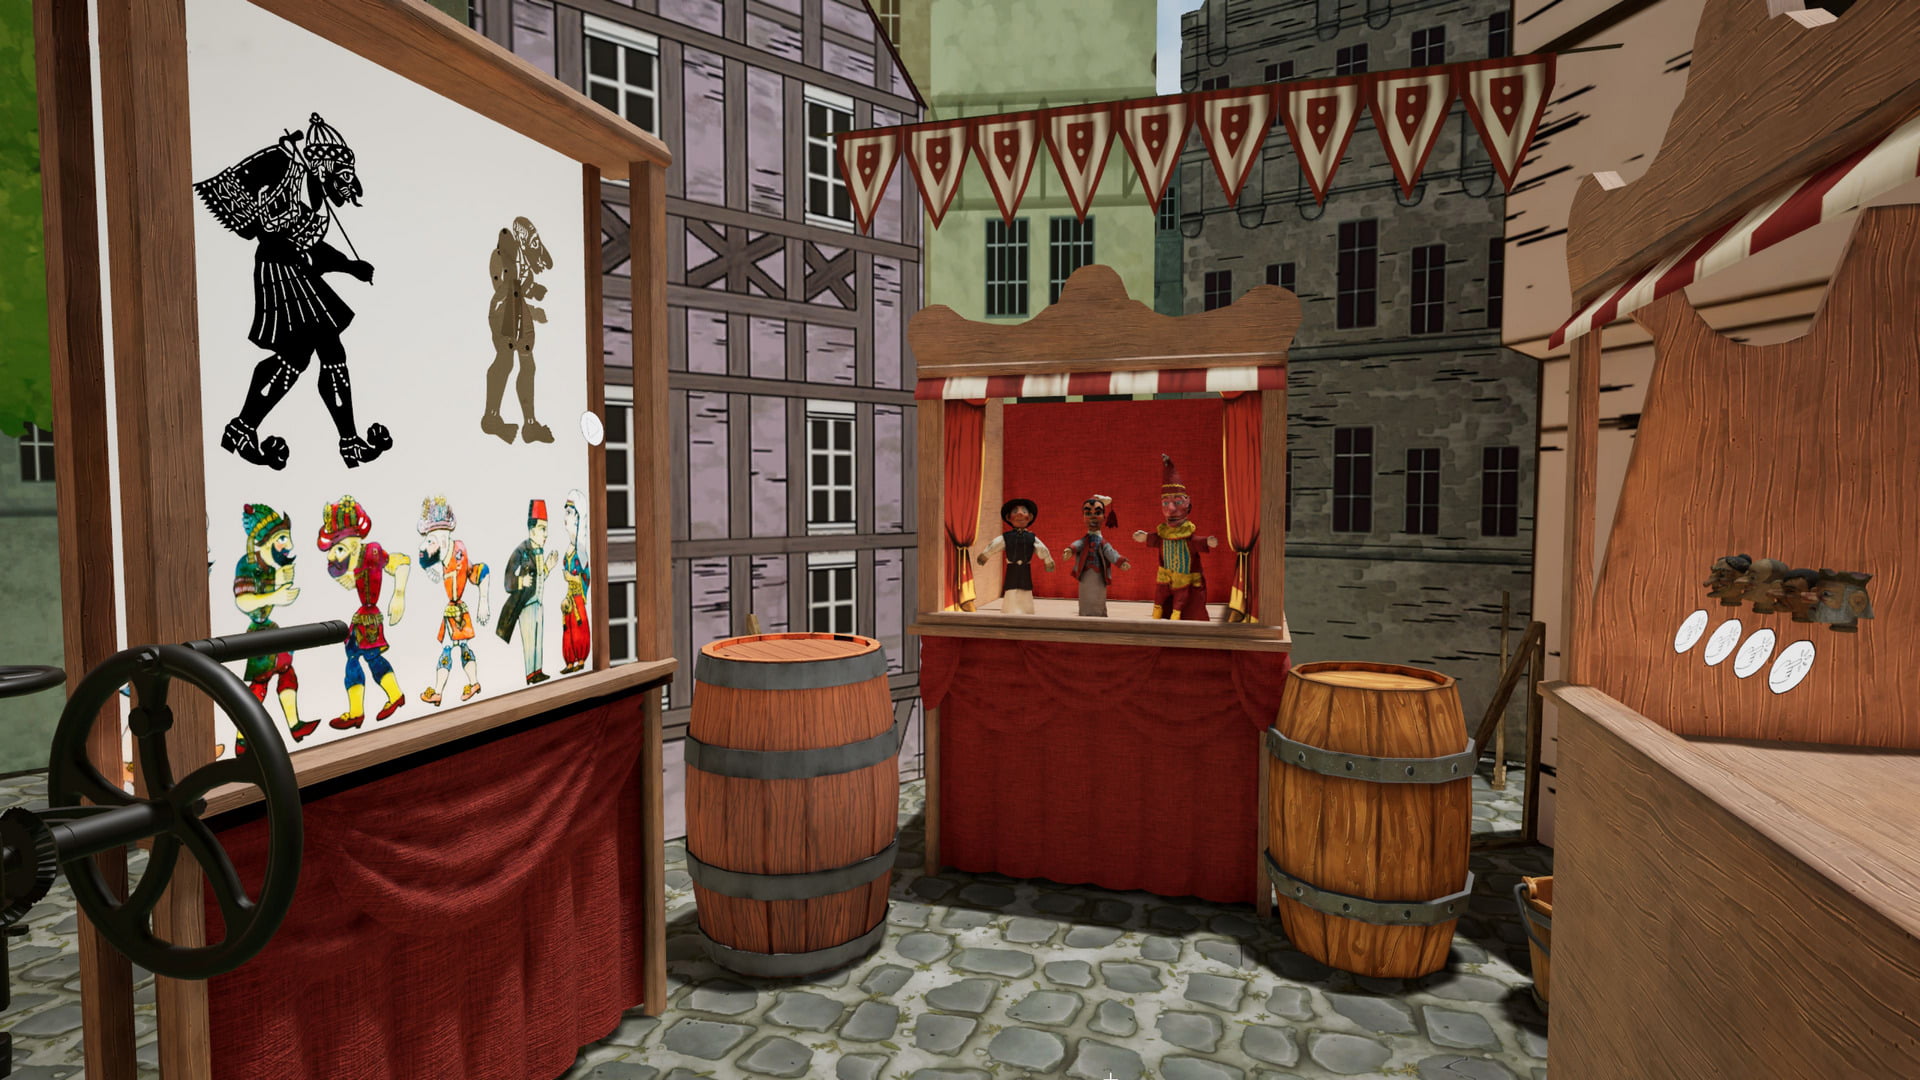 VR experience "Puppets 4.0" takes you into puppet theater